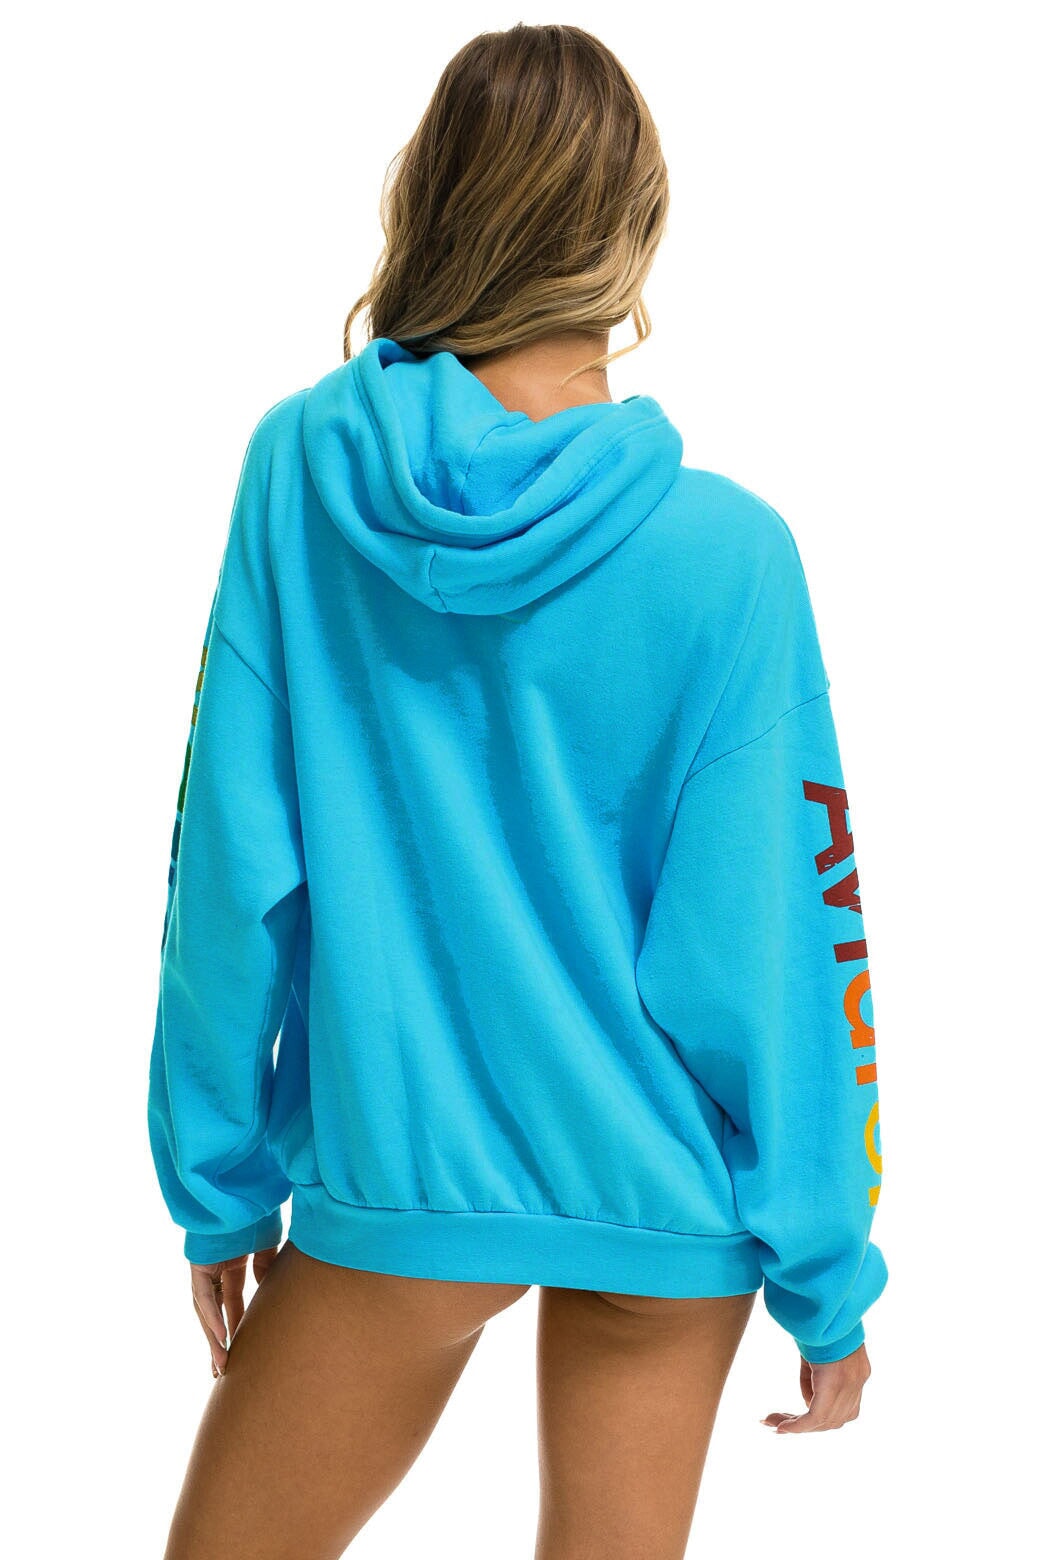 AVIATOR NATION ASPEN RELAXED PULLOVER HOODIE - NEON BLUE Hoodie Aviator Nation 